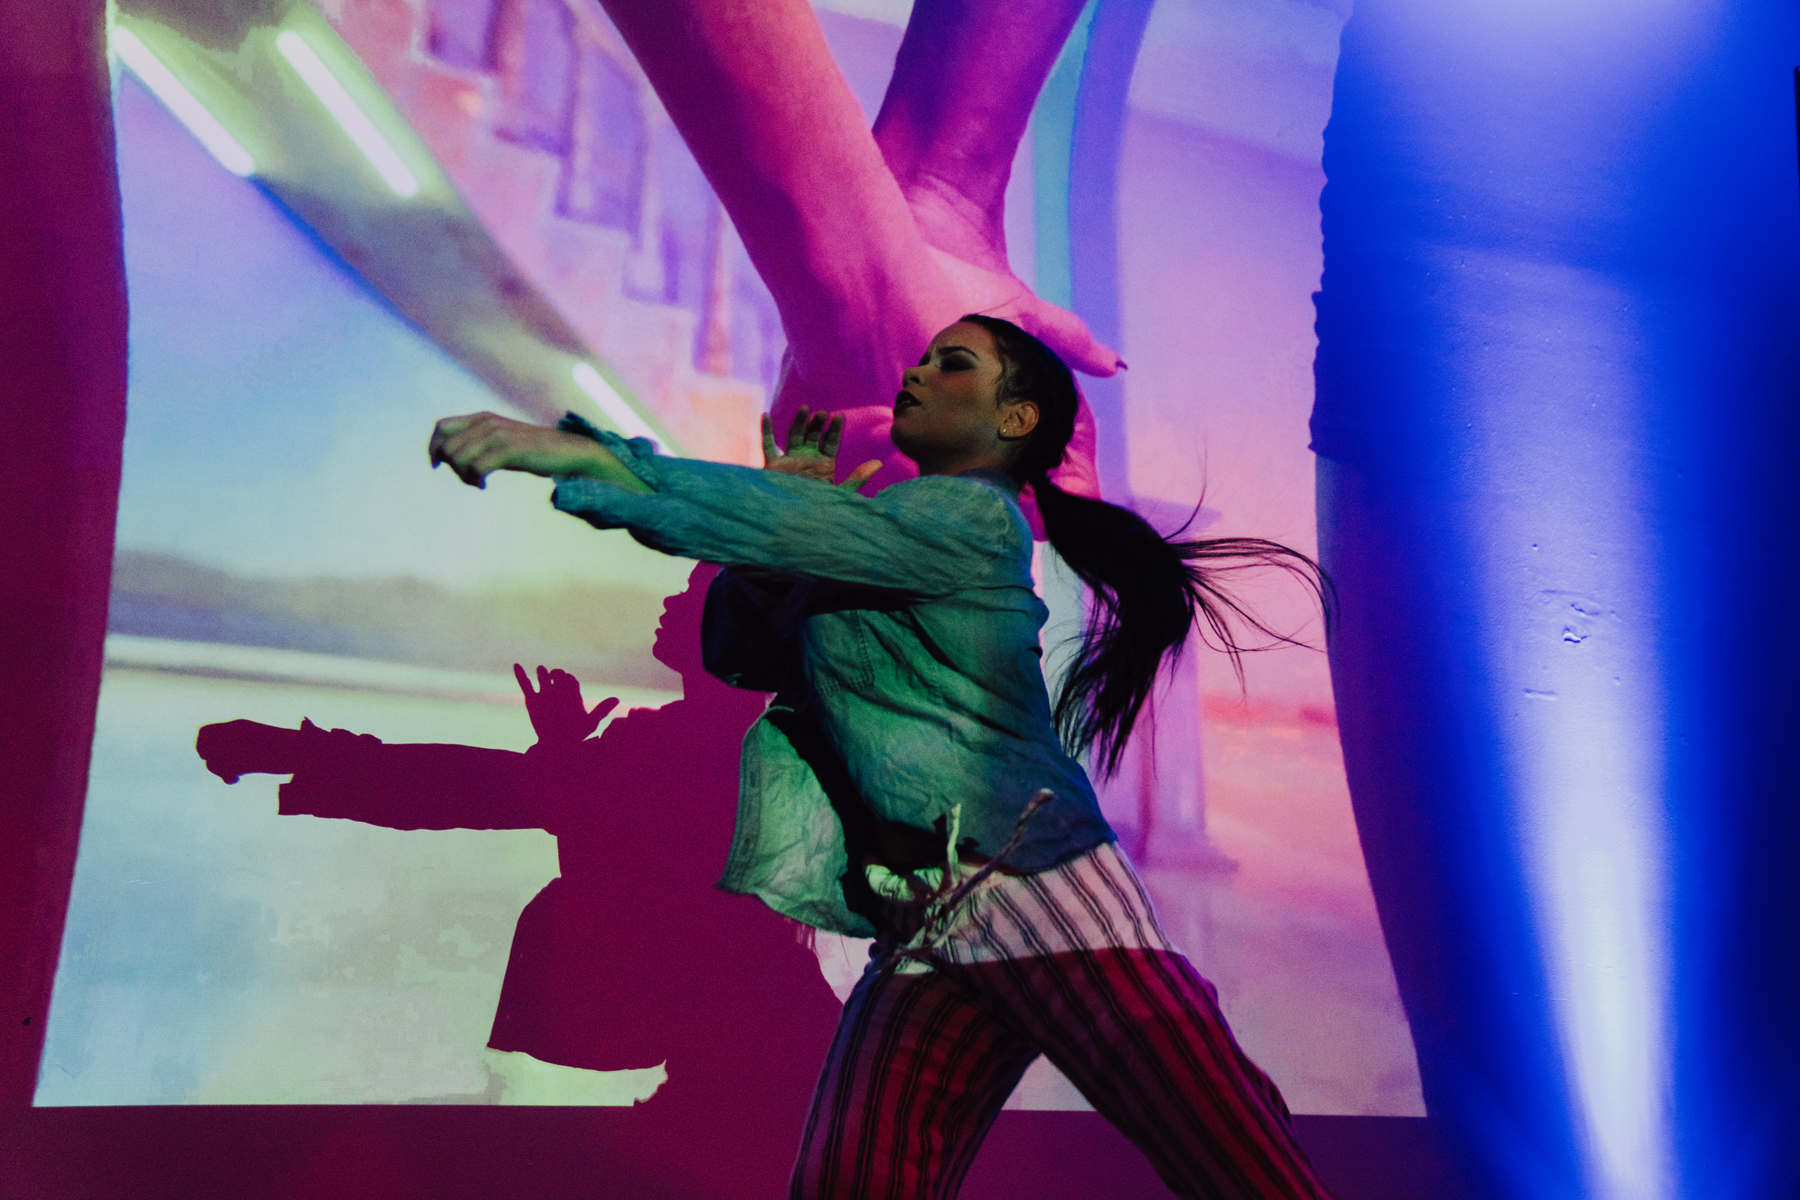 A dancer in a green long-sleeved jacket and black and white striped pants, reaches across her body as her long ponytail moves behind her.  She is in shadowy and colorful lighting in front of a video image of two holding hands.